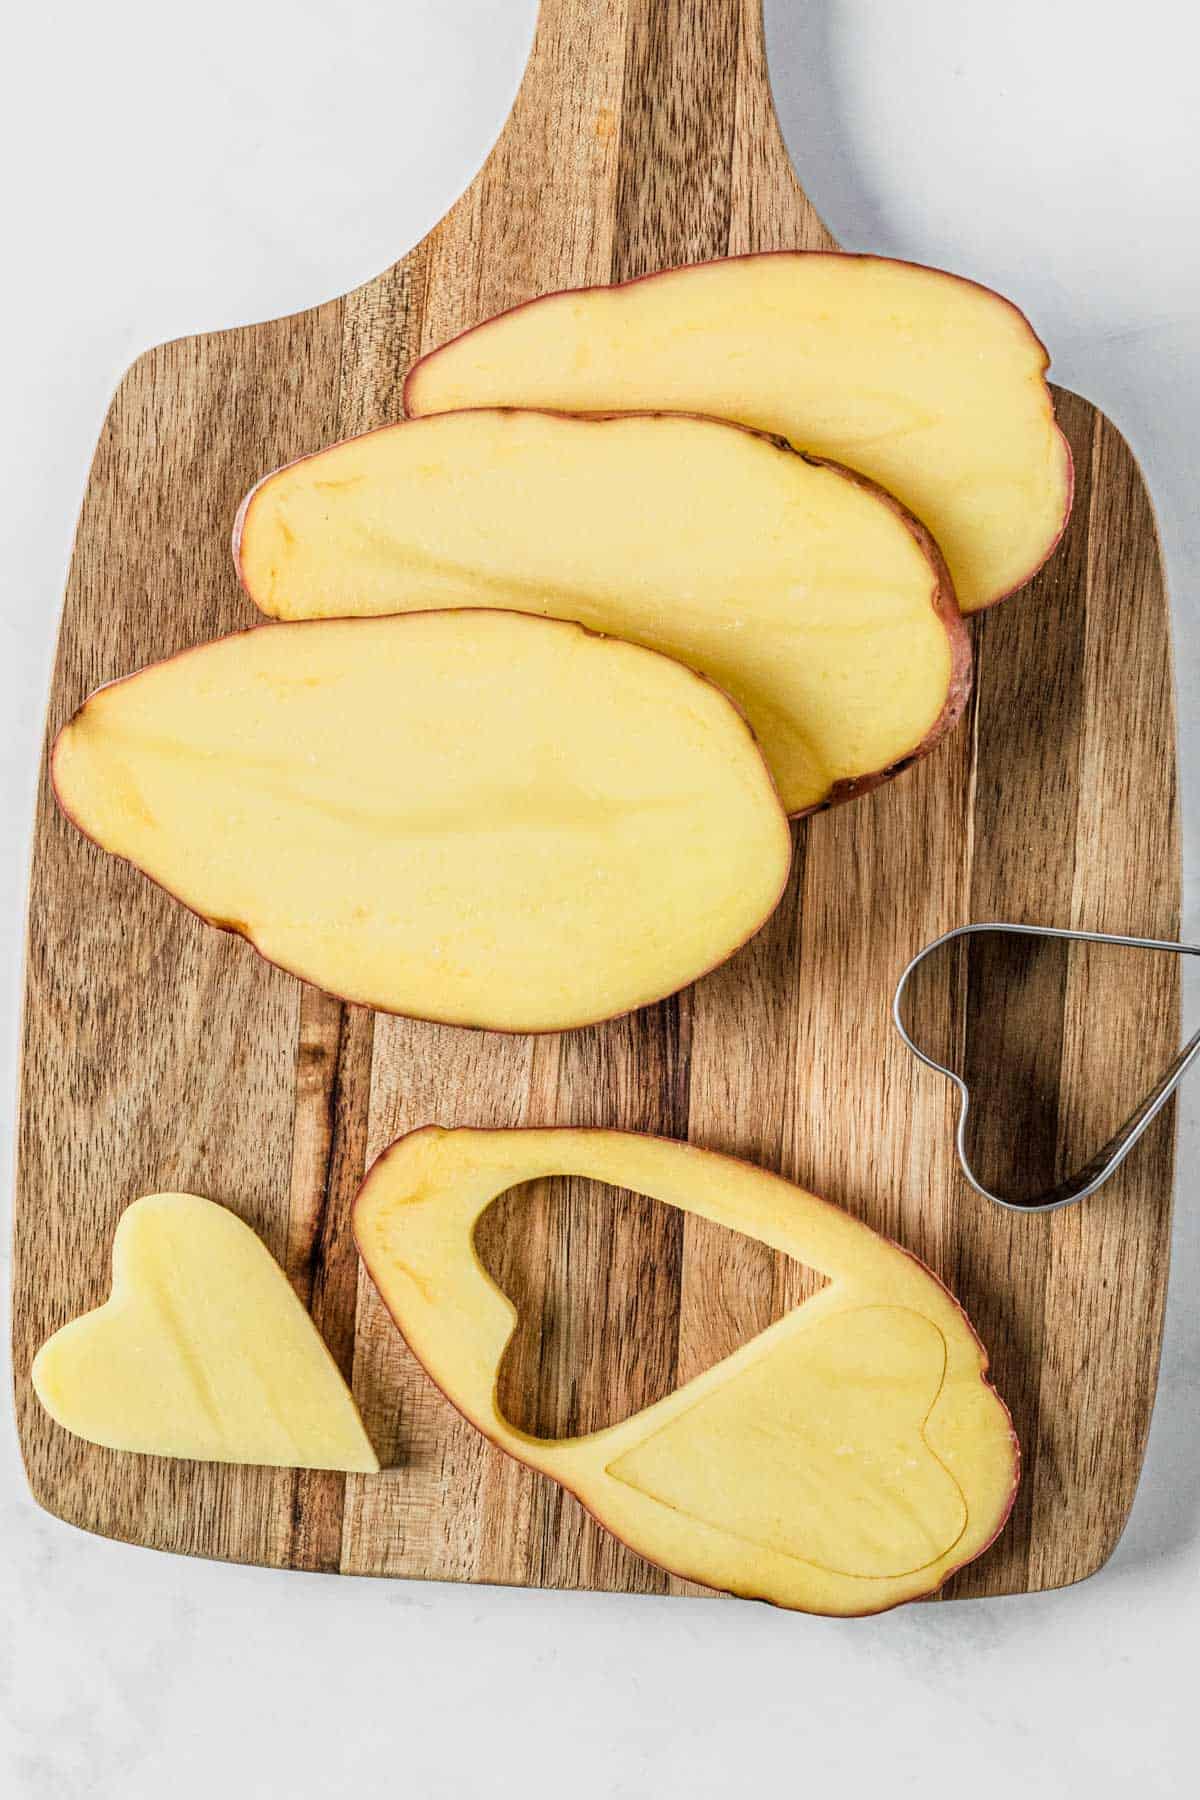 slicing the russet potatoes and cutting out heart shapes